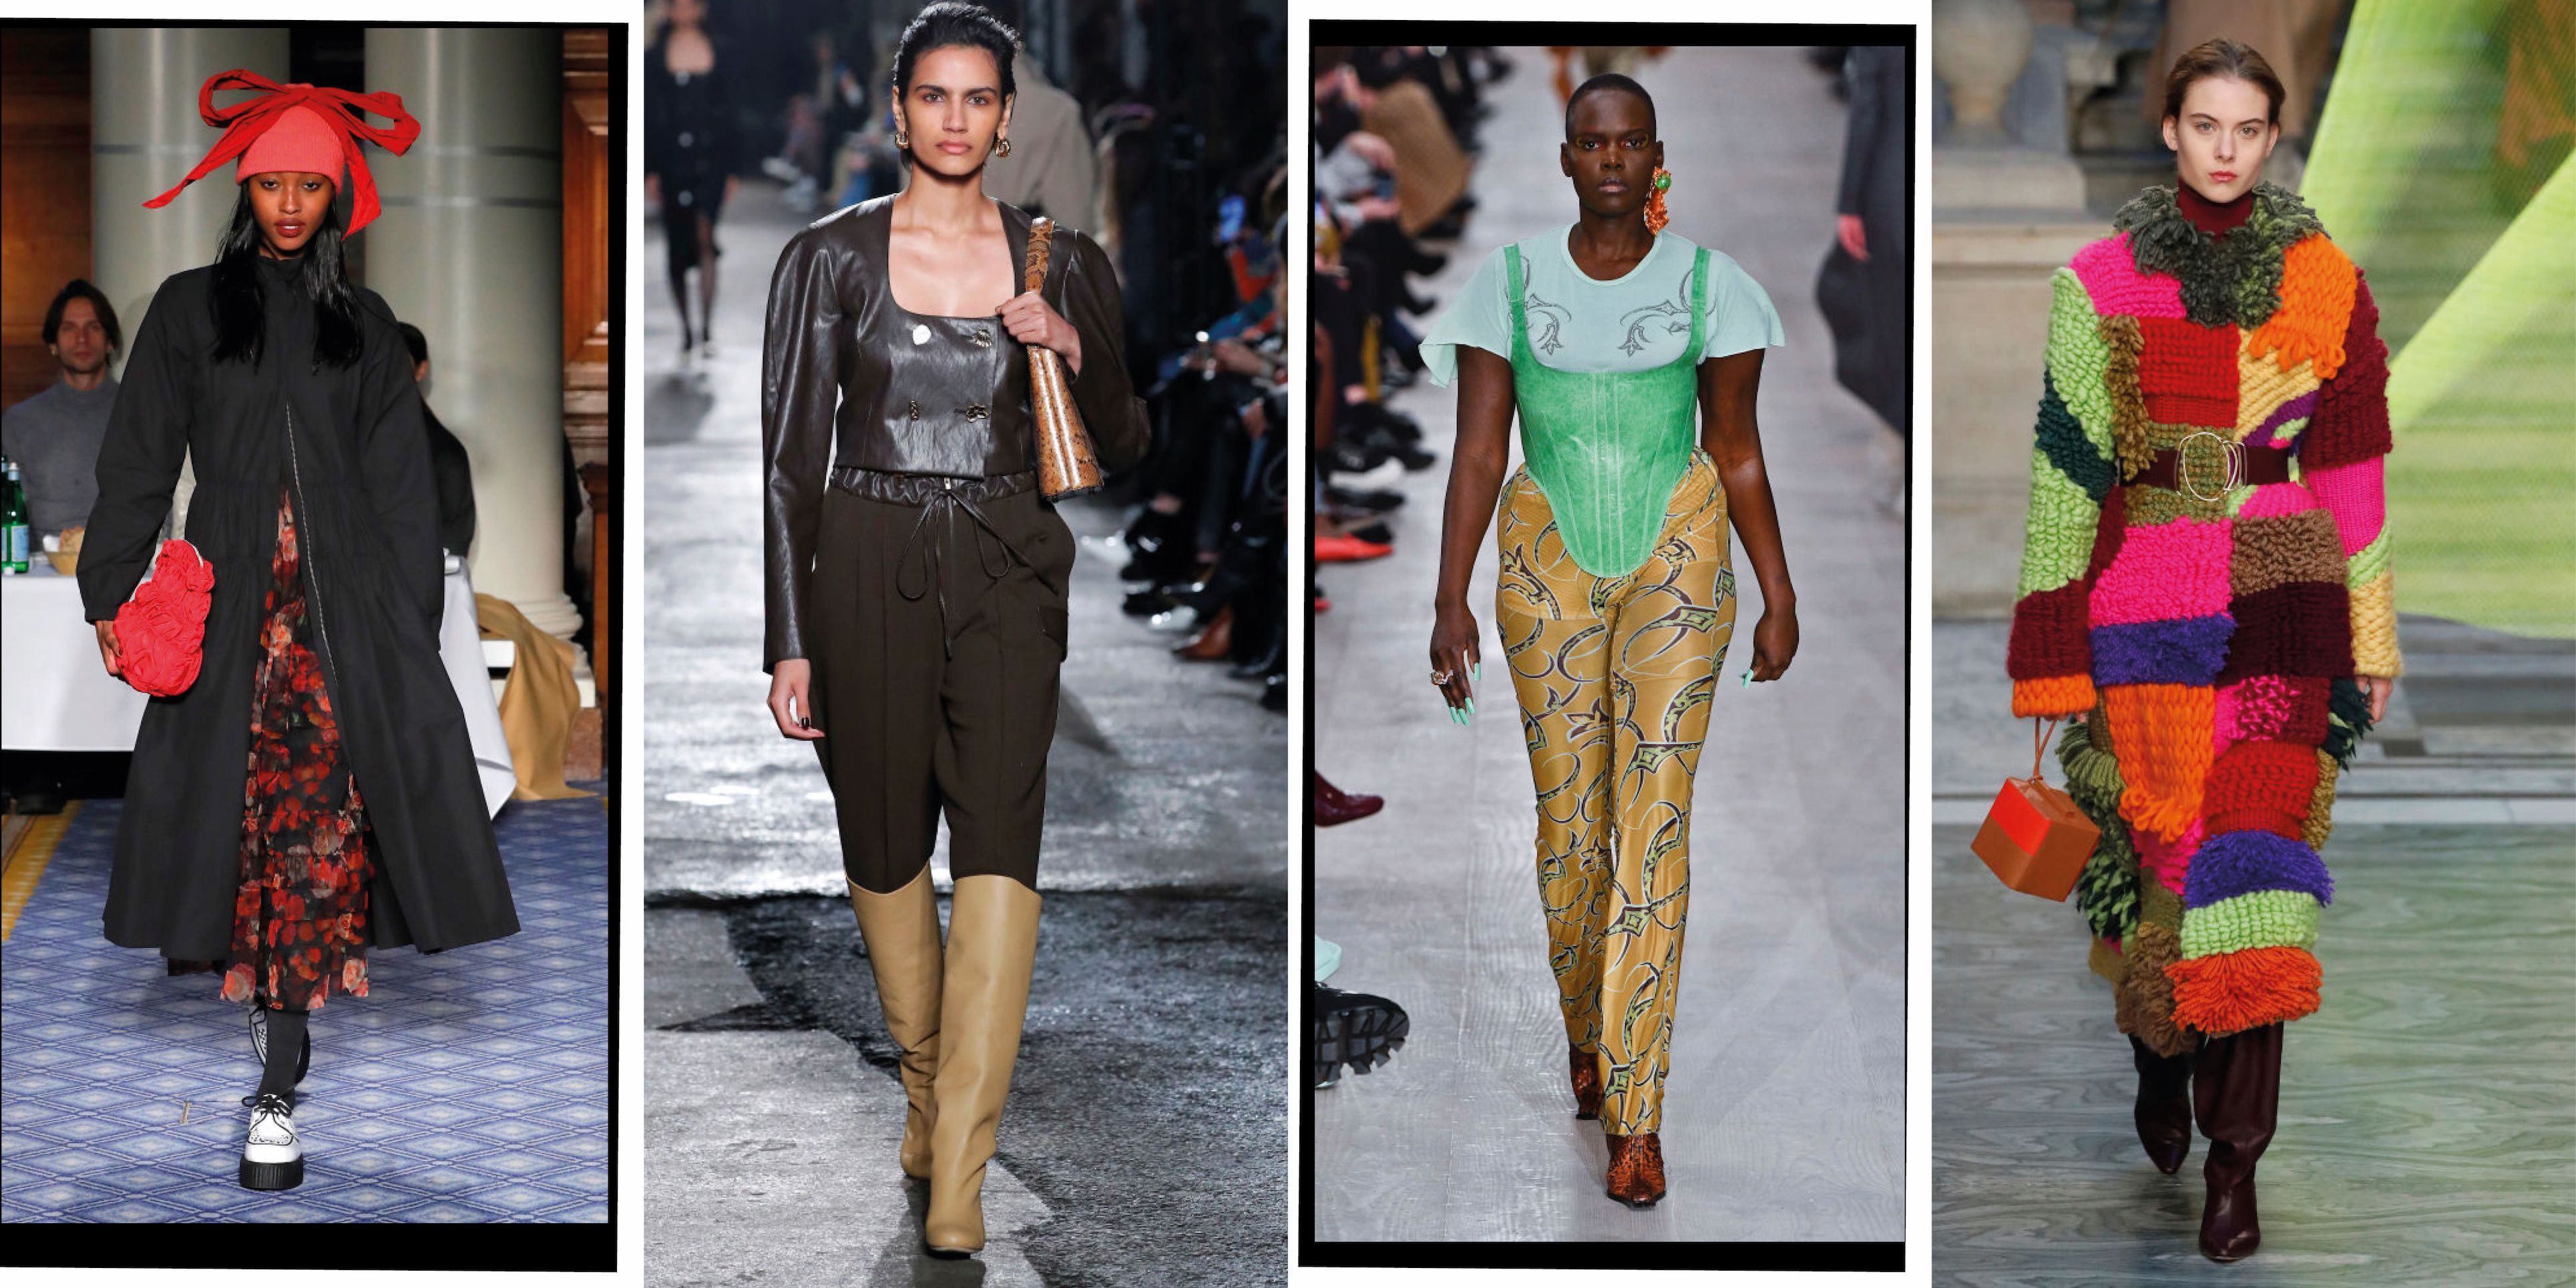 London Fashion Week: Styling Tips From The Runways